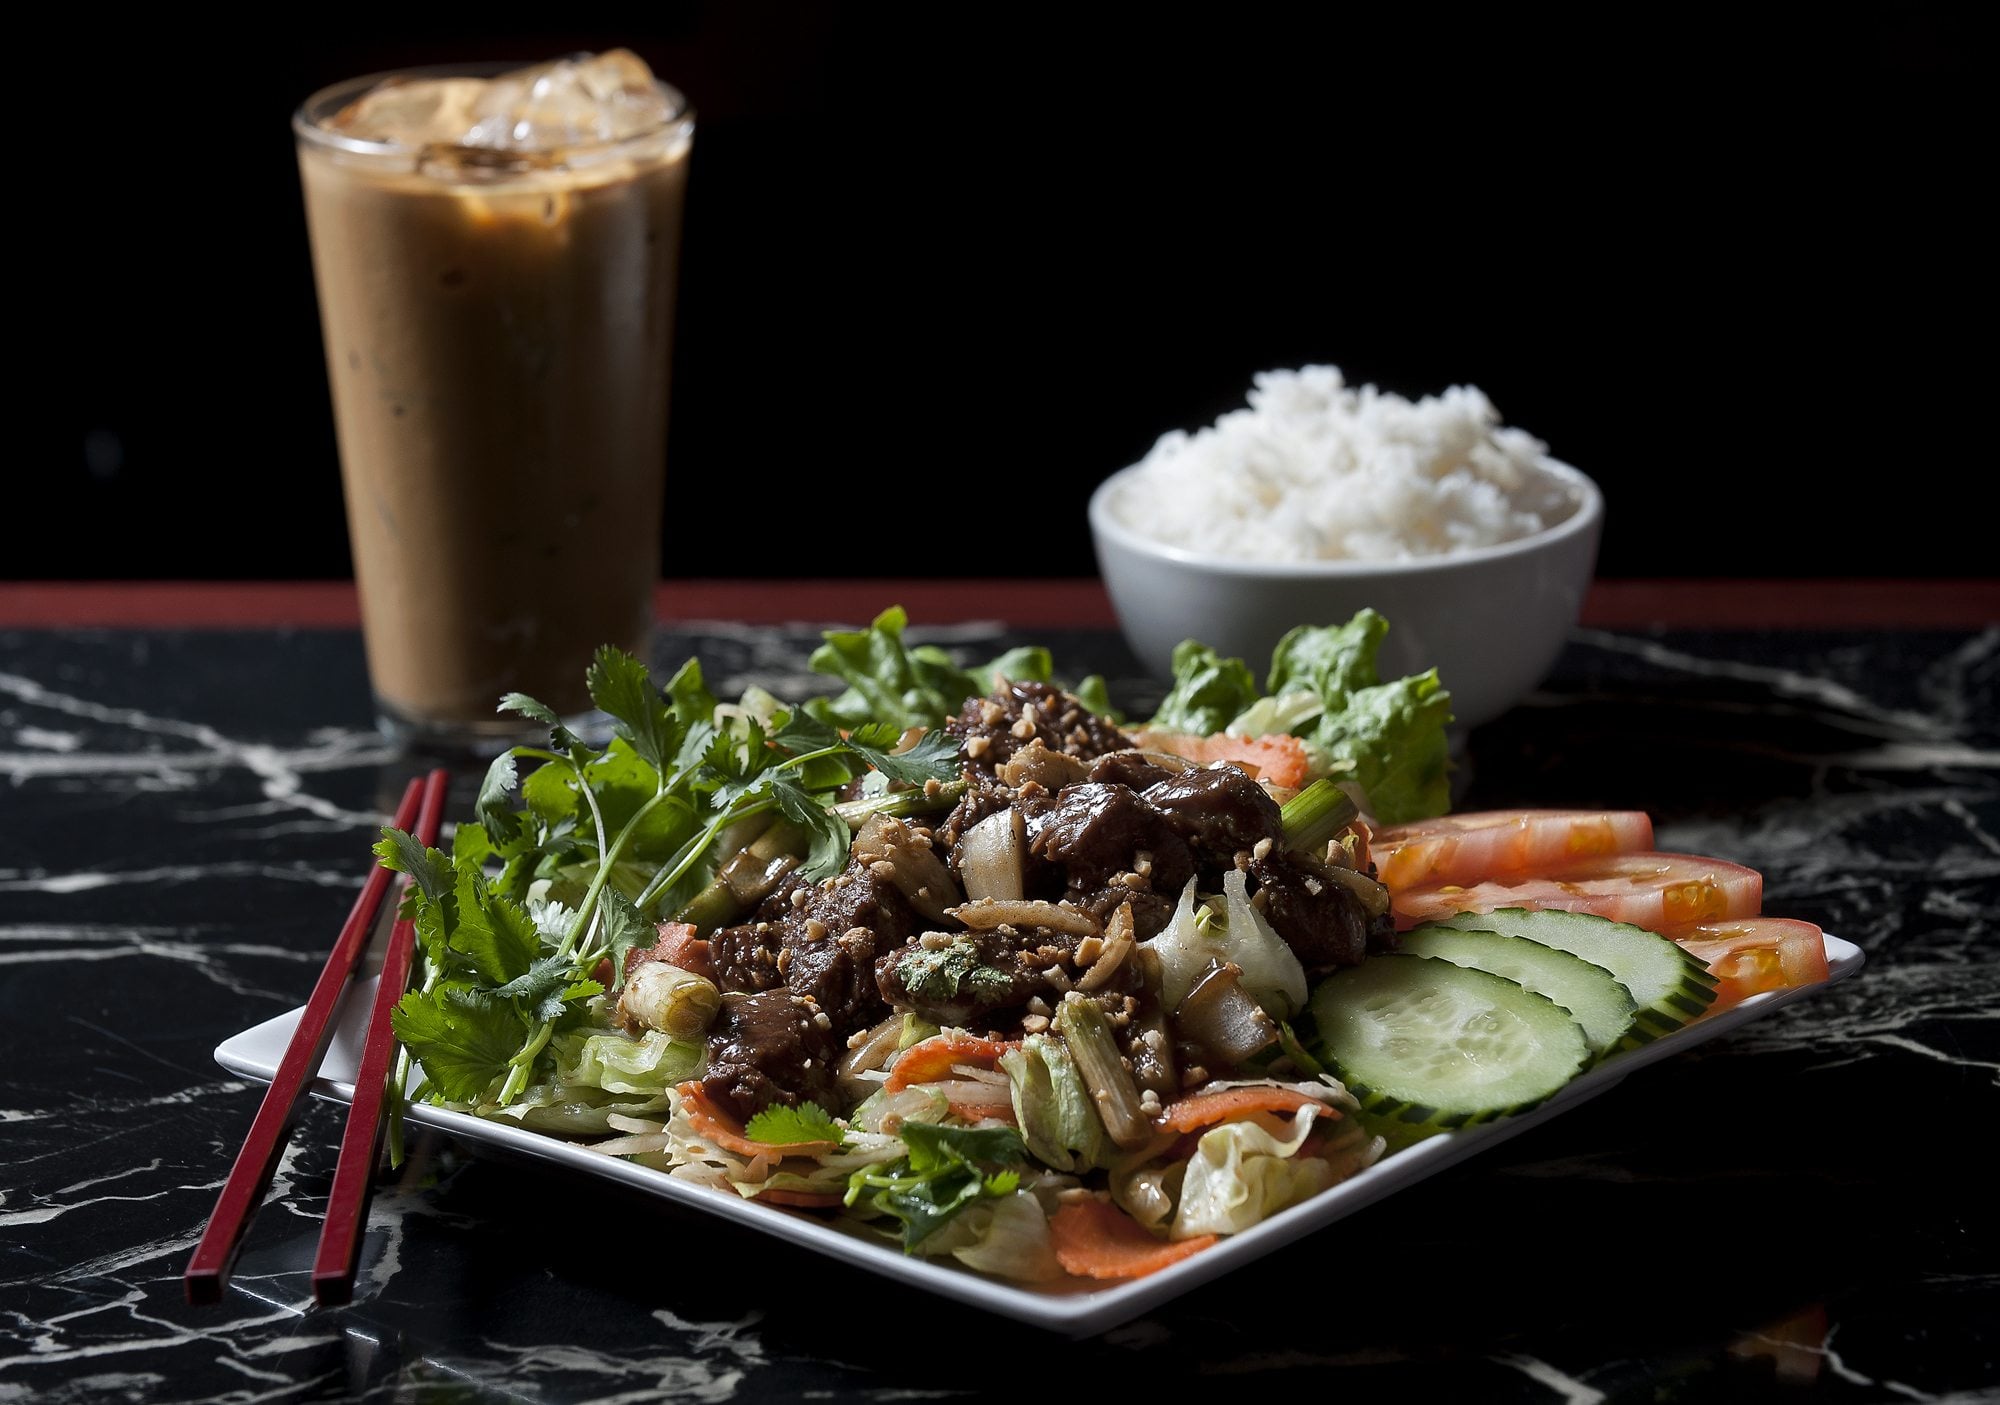 The Bo Luc Lac, a shaken beef salad, is served with steamed rice and a Vietnamese iced coffee at Tan Tan Cafe &amp; Delicatessen in Vancouver.